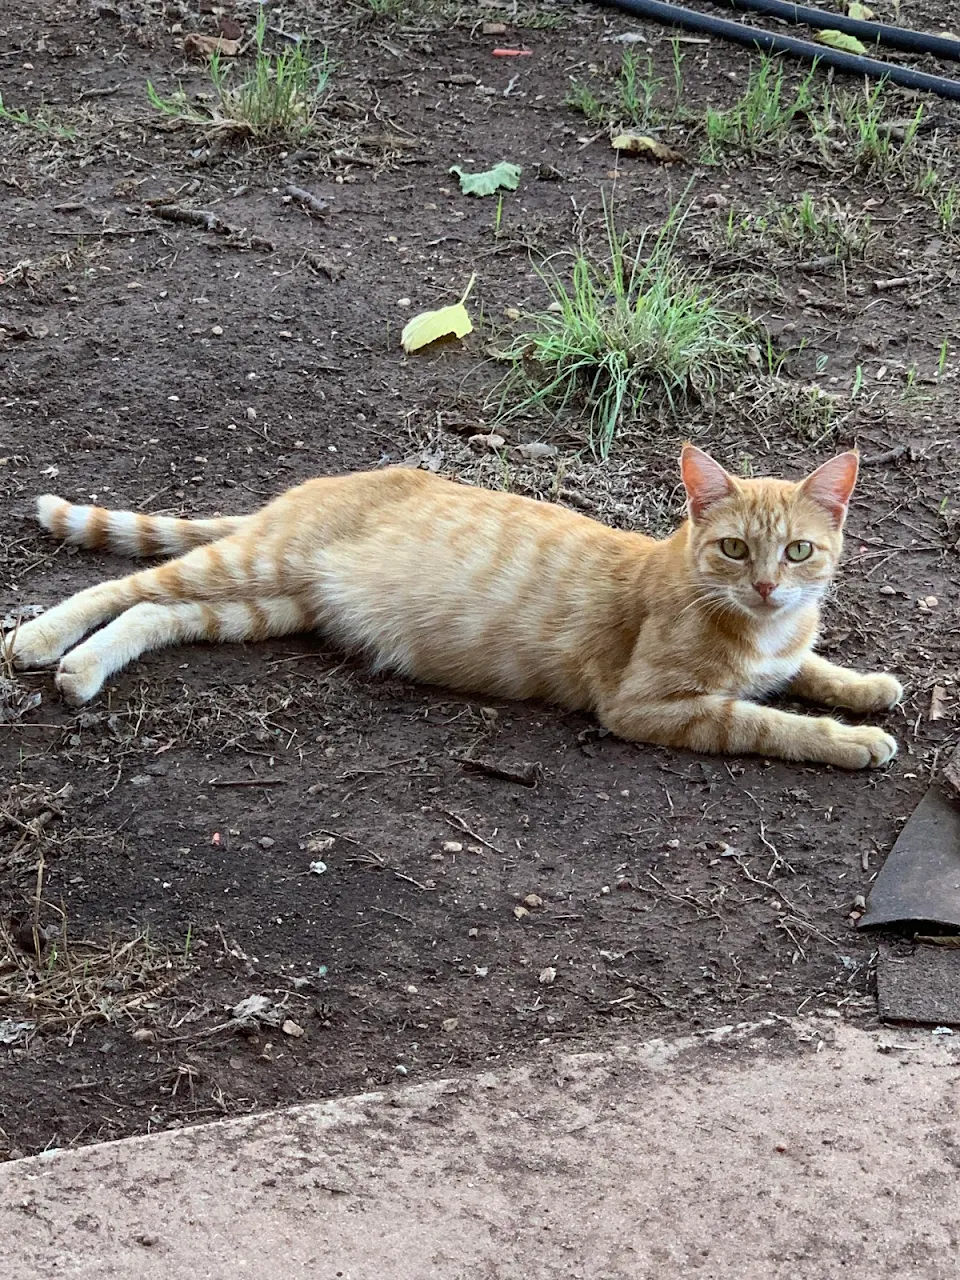 Tom The Stray Cat (question in comments)